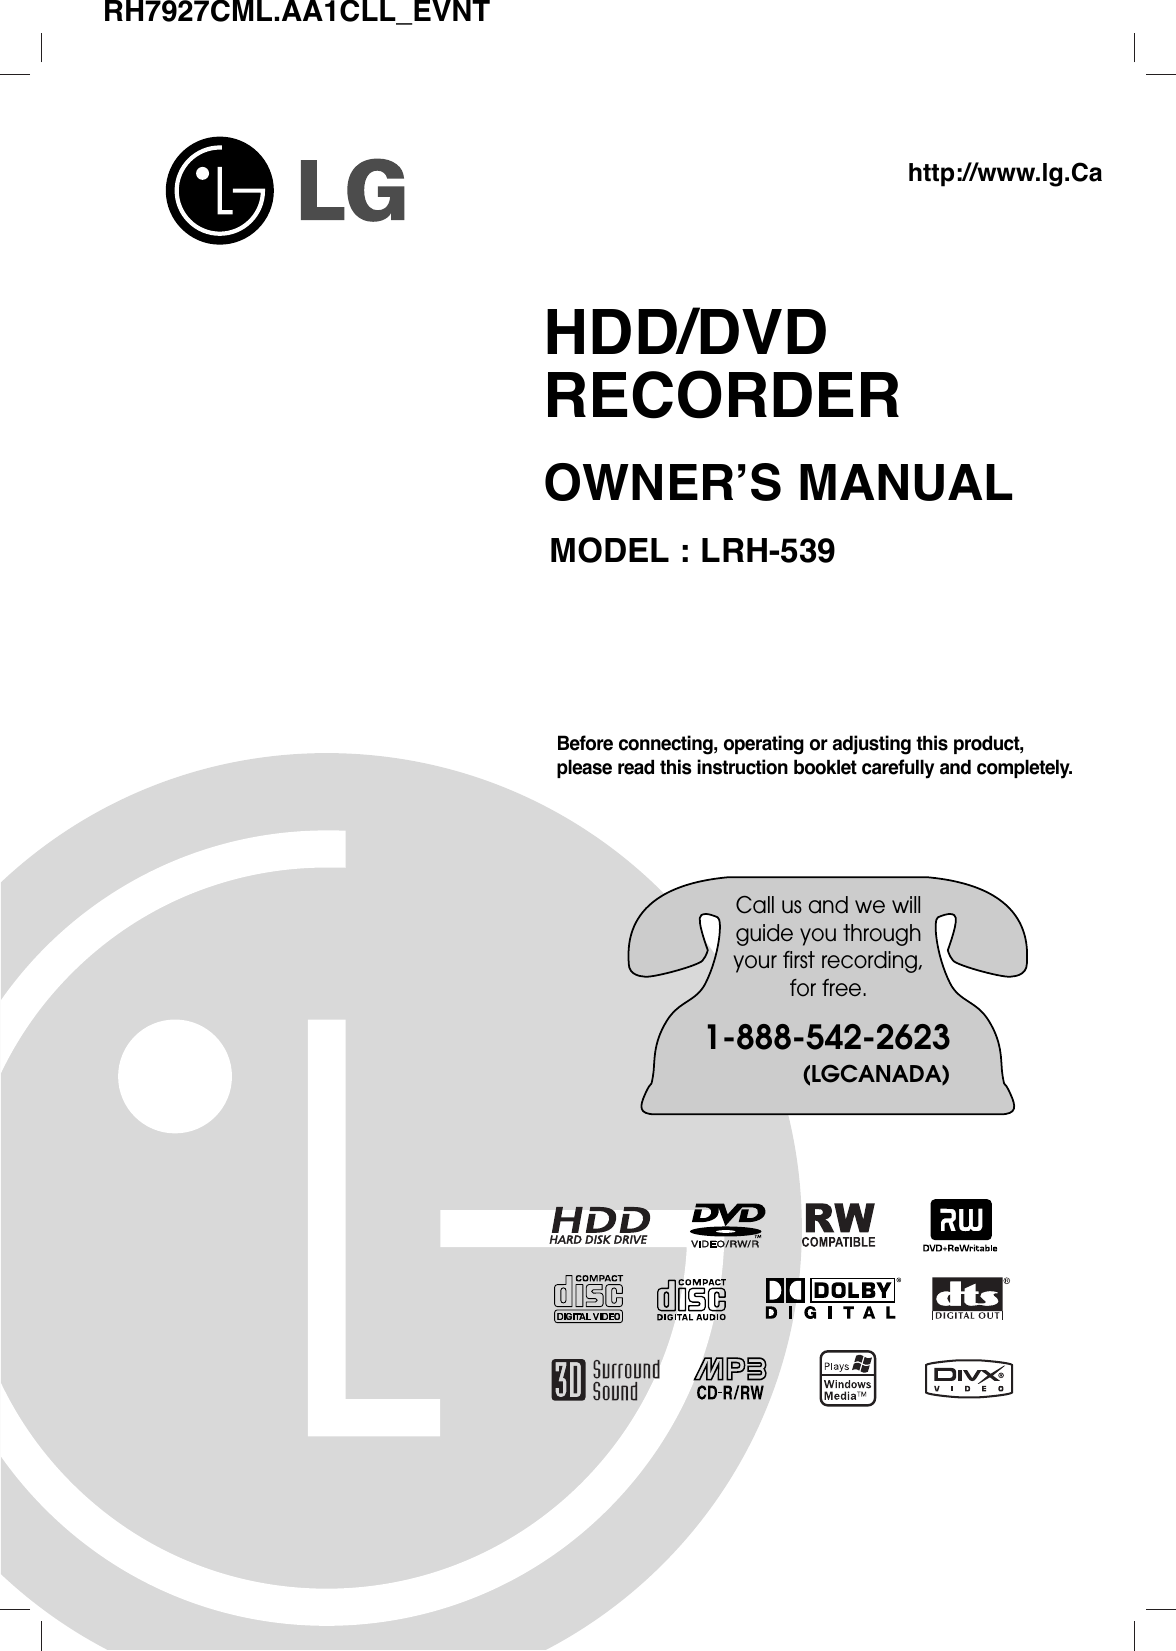 HDD/DVDRECORDEROWNER’S MANUALMODEL : LRH-539Before connecting, operating or adjusting this product,please read this instruction booklet carefully and completely.RH7927CML.AA1CLL_EVNTCall us and we willguide you throughyour first recording,for free.1-888-542-2623(LGCANADA)http://www.lg.Ca